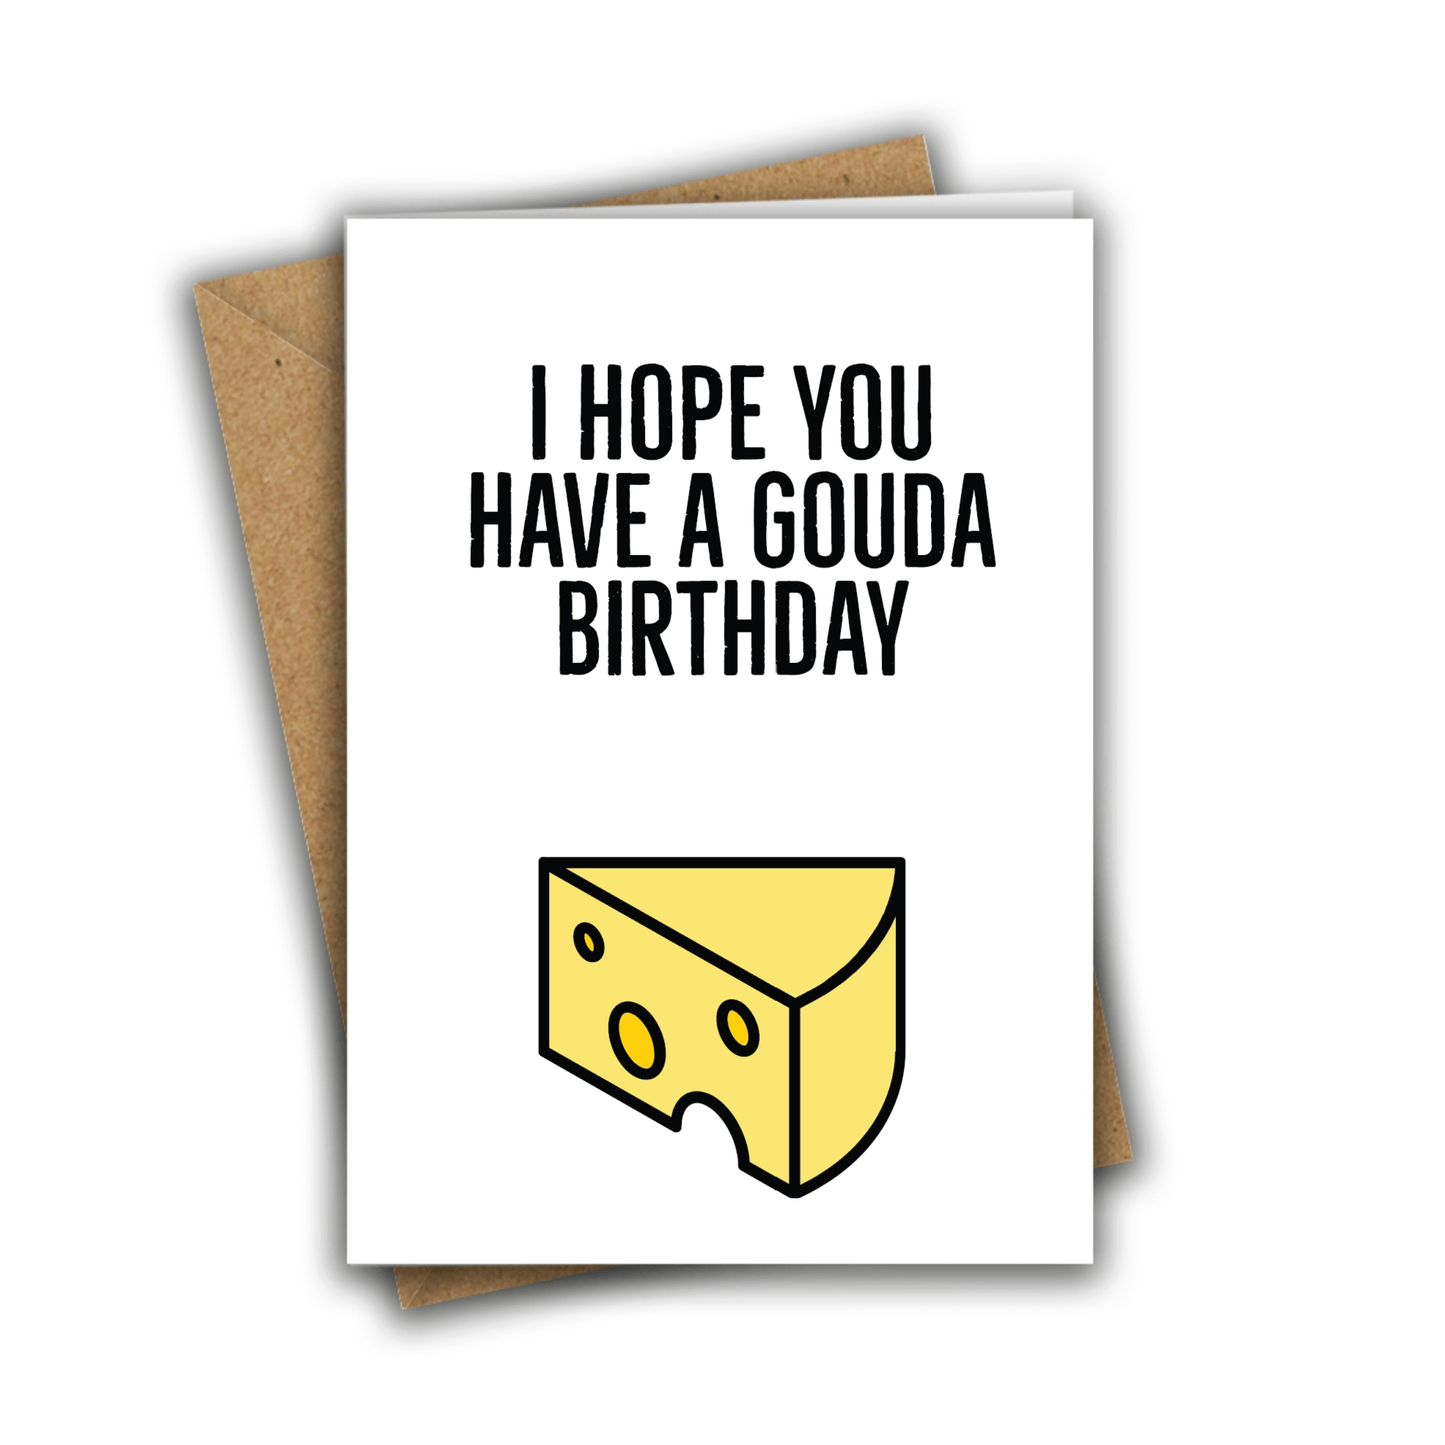 Little Kraken's I Hope You Have a Gouda Birthday Greeting Card, Birthday Cards for £3.50 each